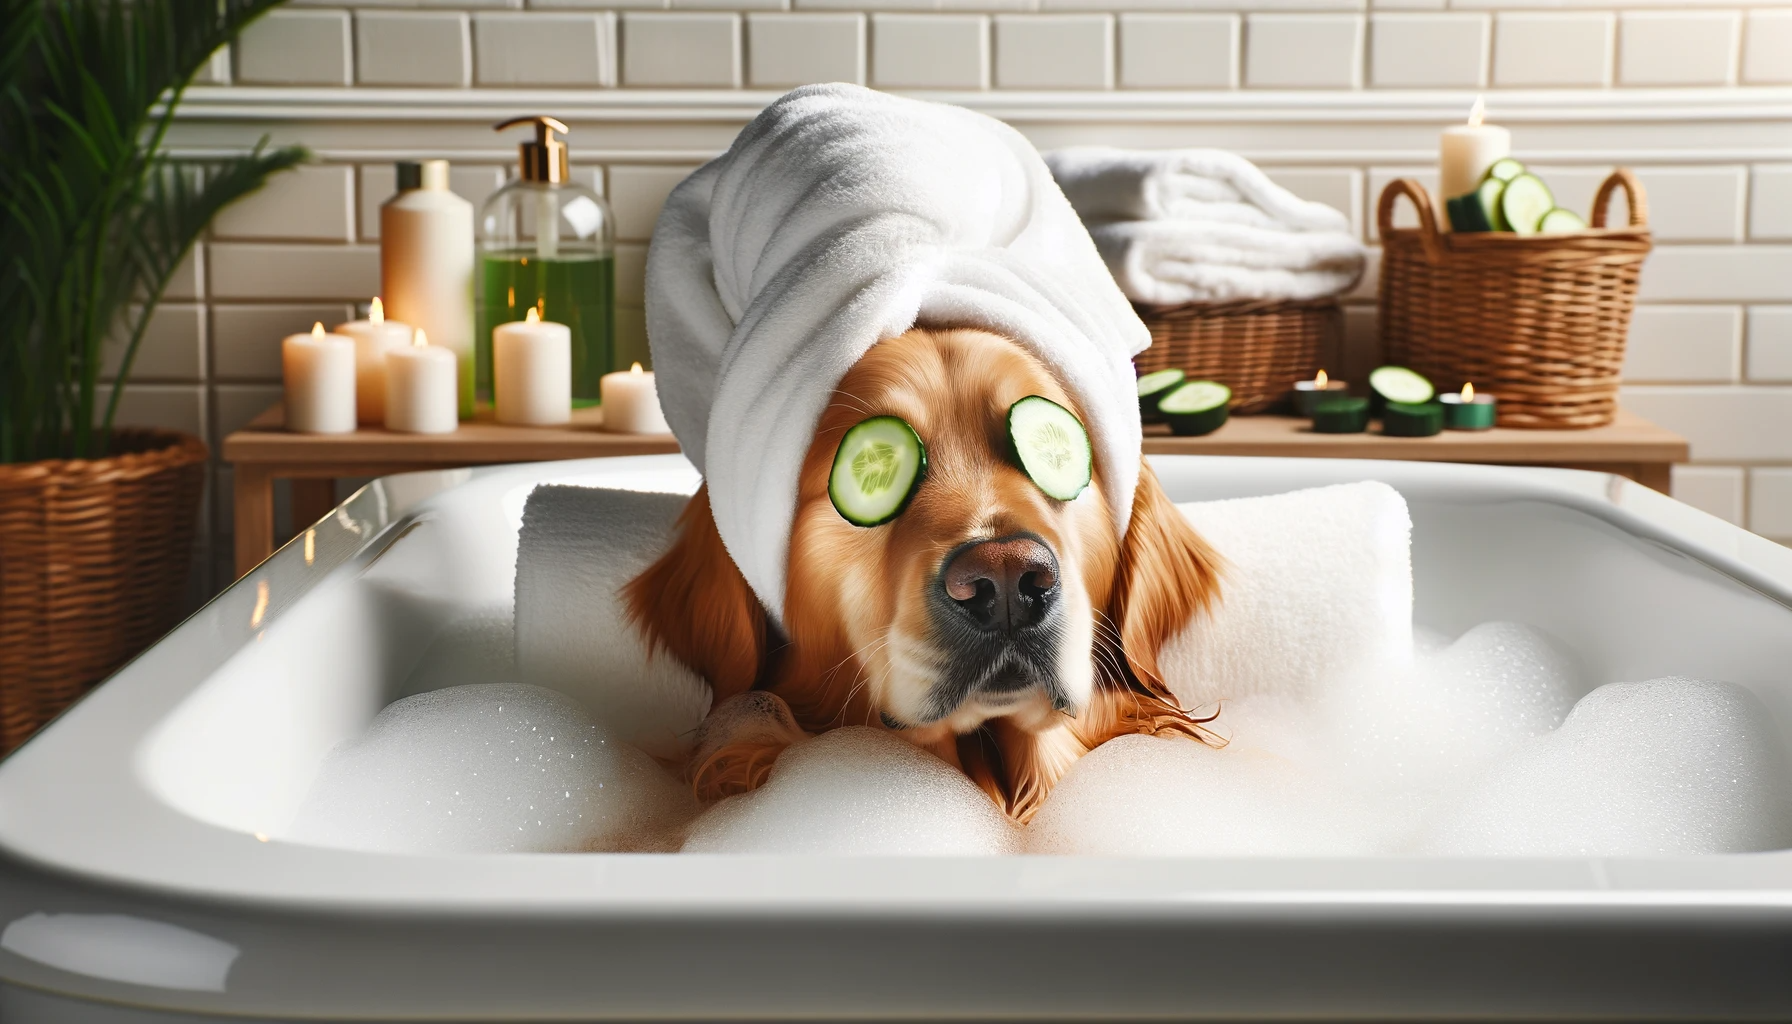 A Goldador luxuriating in a bubble bath, with cucumbers on its eyes and a towel wrapped around its head